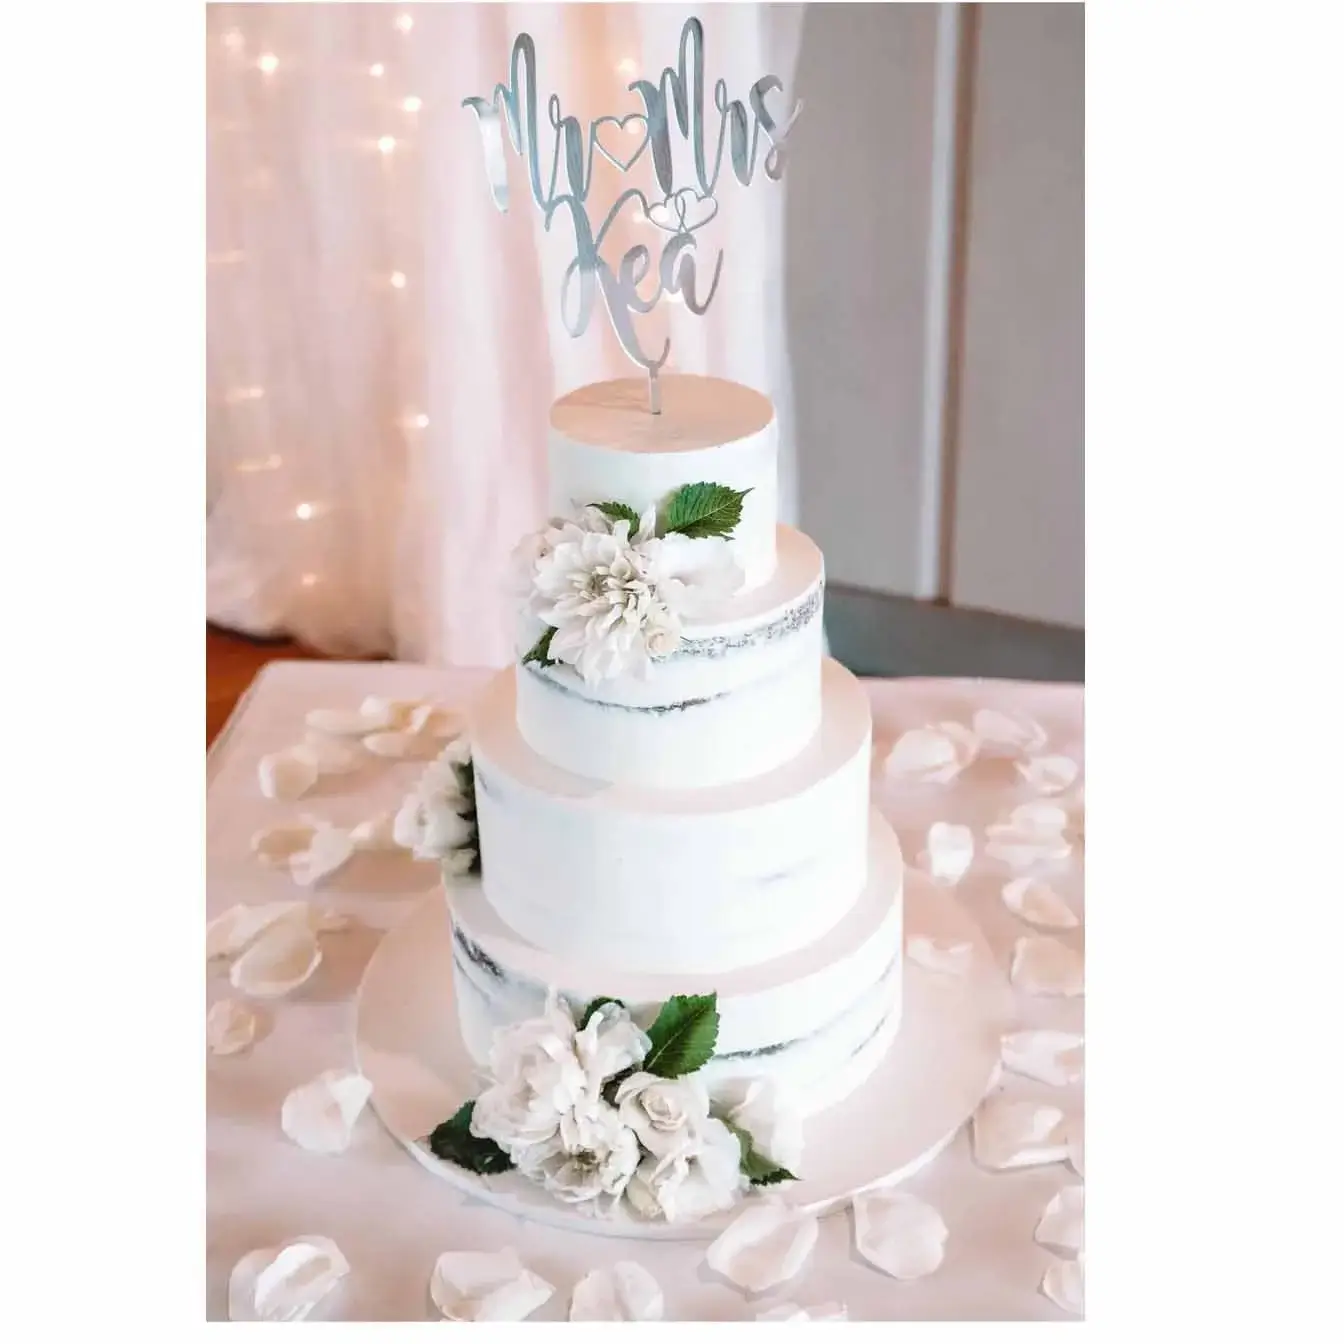 Elegance in Layers Wedding Cake - A four-tier semi-naked wedding cake with a personalized cake topper, a timeless centerpiece for weddings filled with love and commitment.